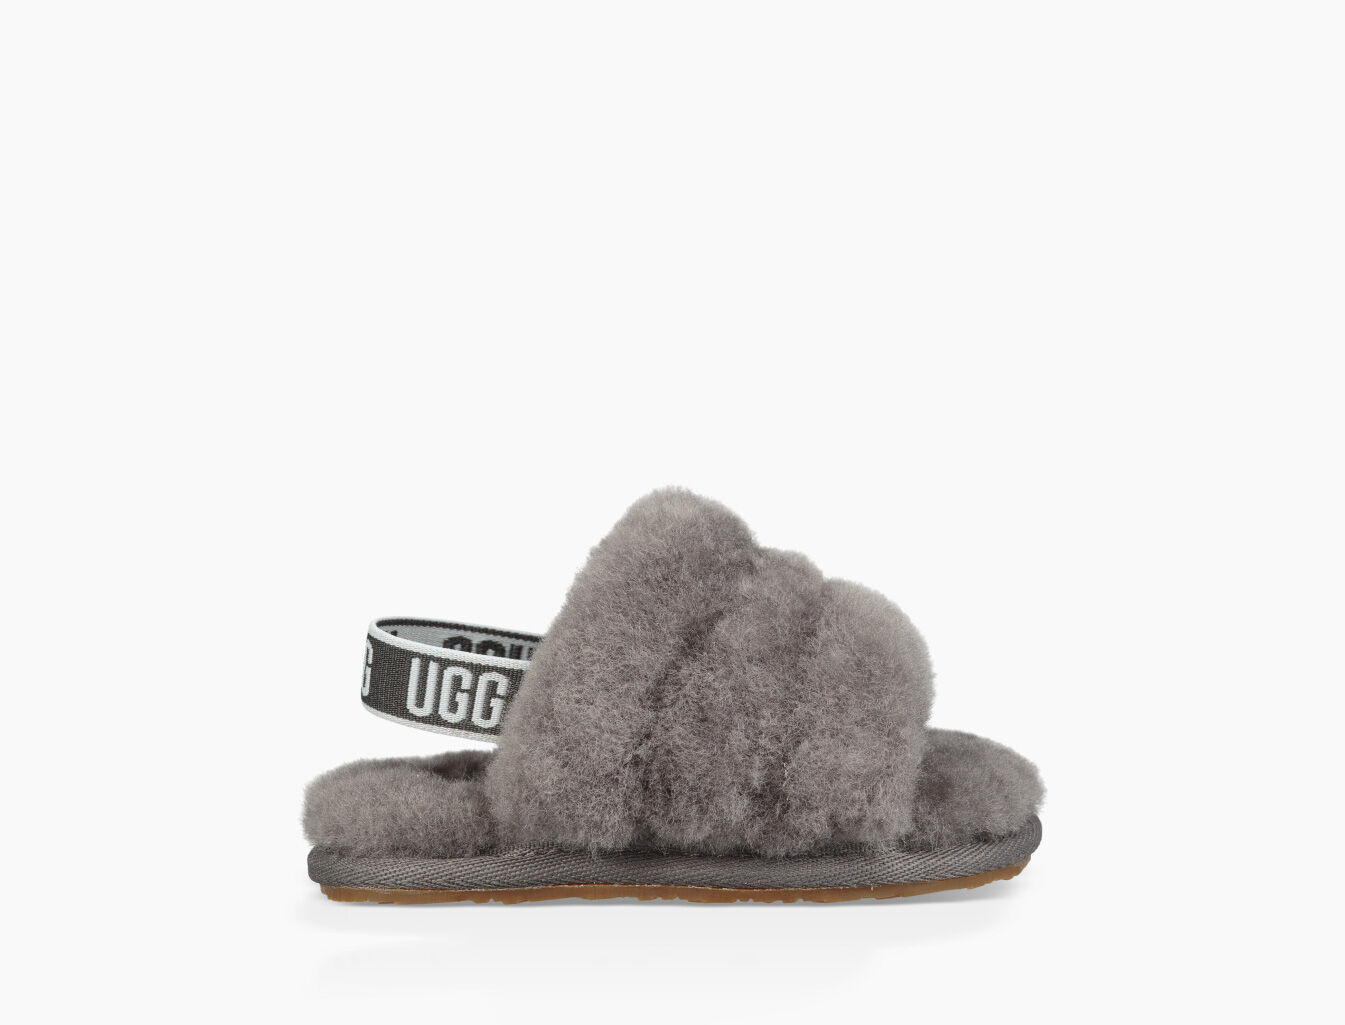 Shearling UGG Chaussures Tongs Fluff Yeah Slide pour Enfants en taille 33.5 